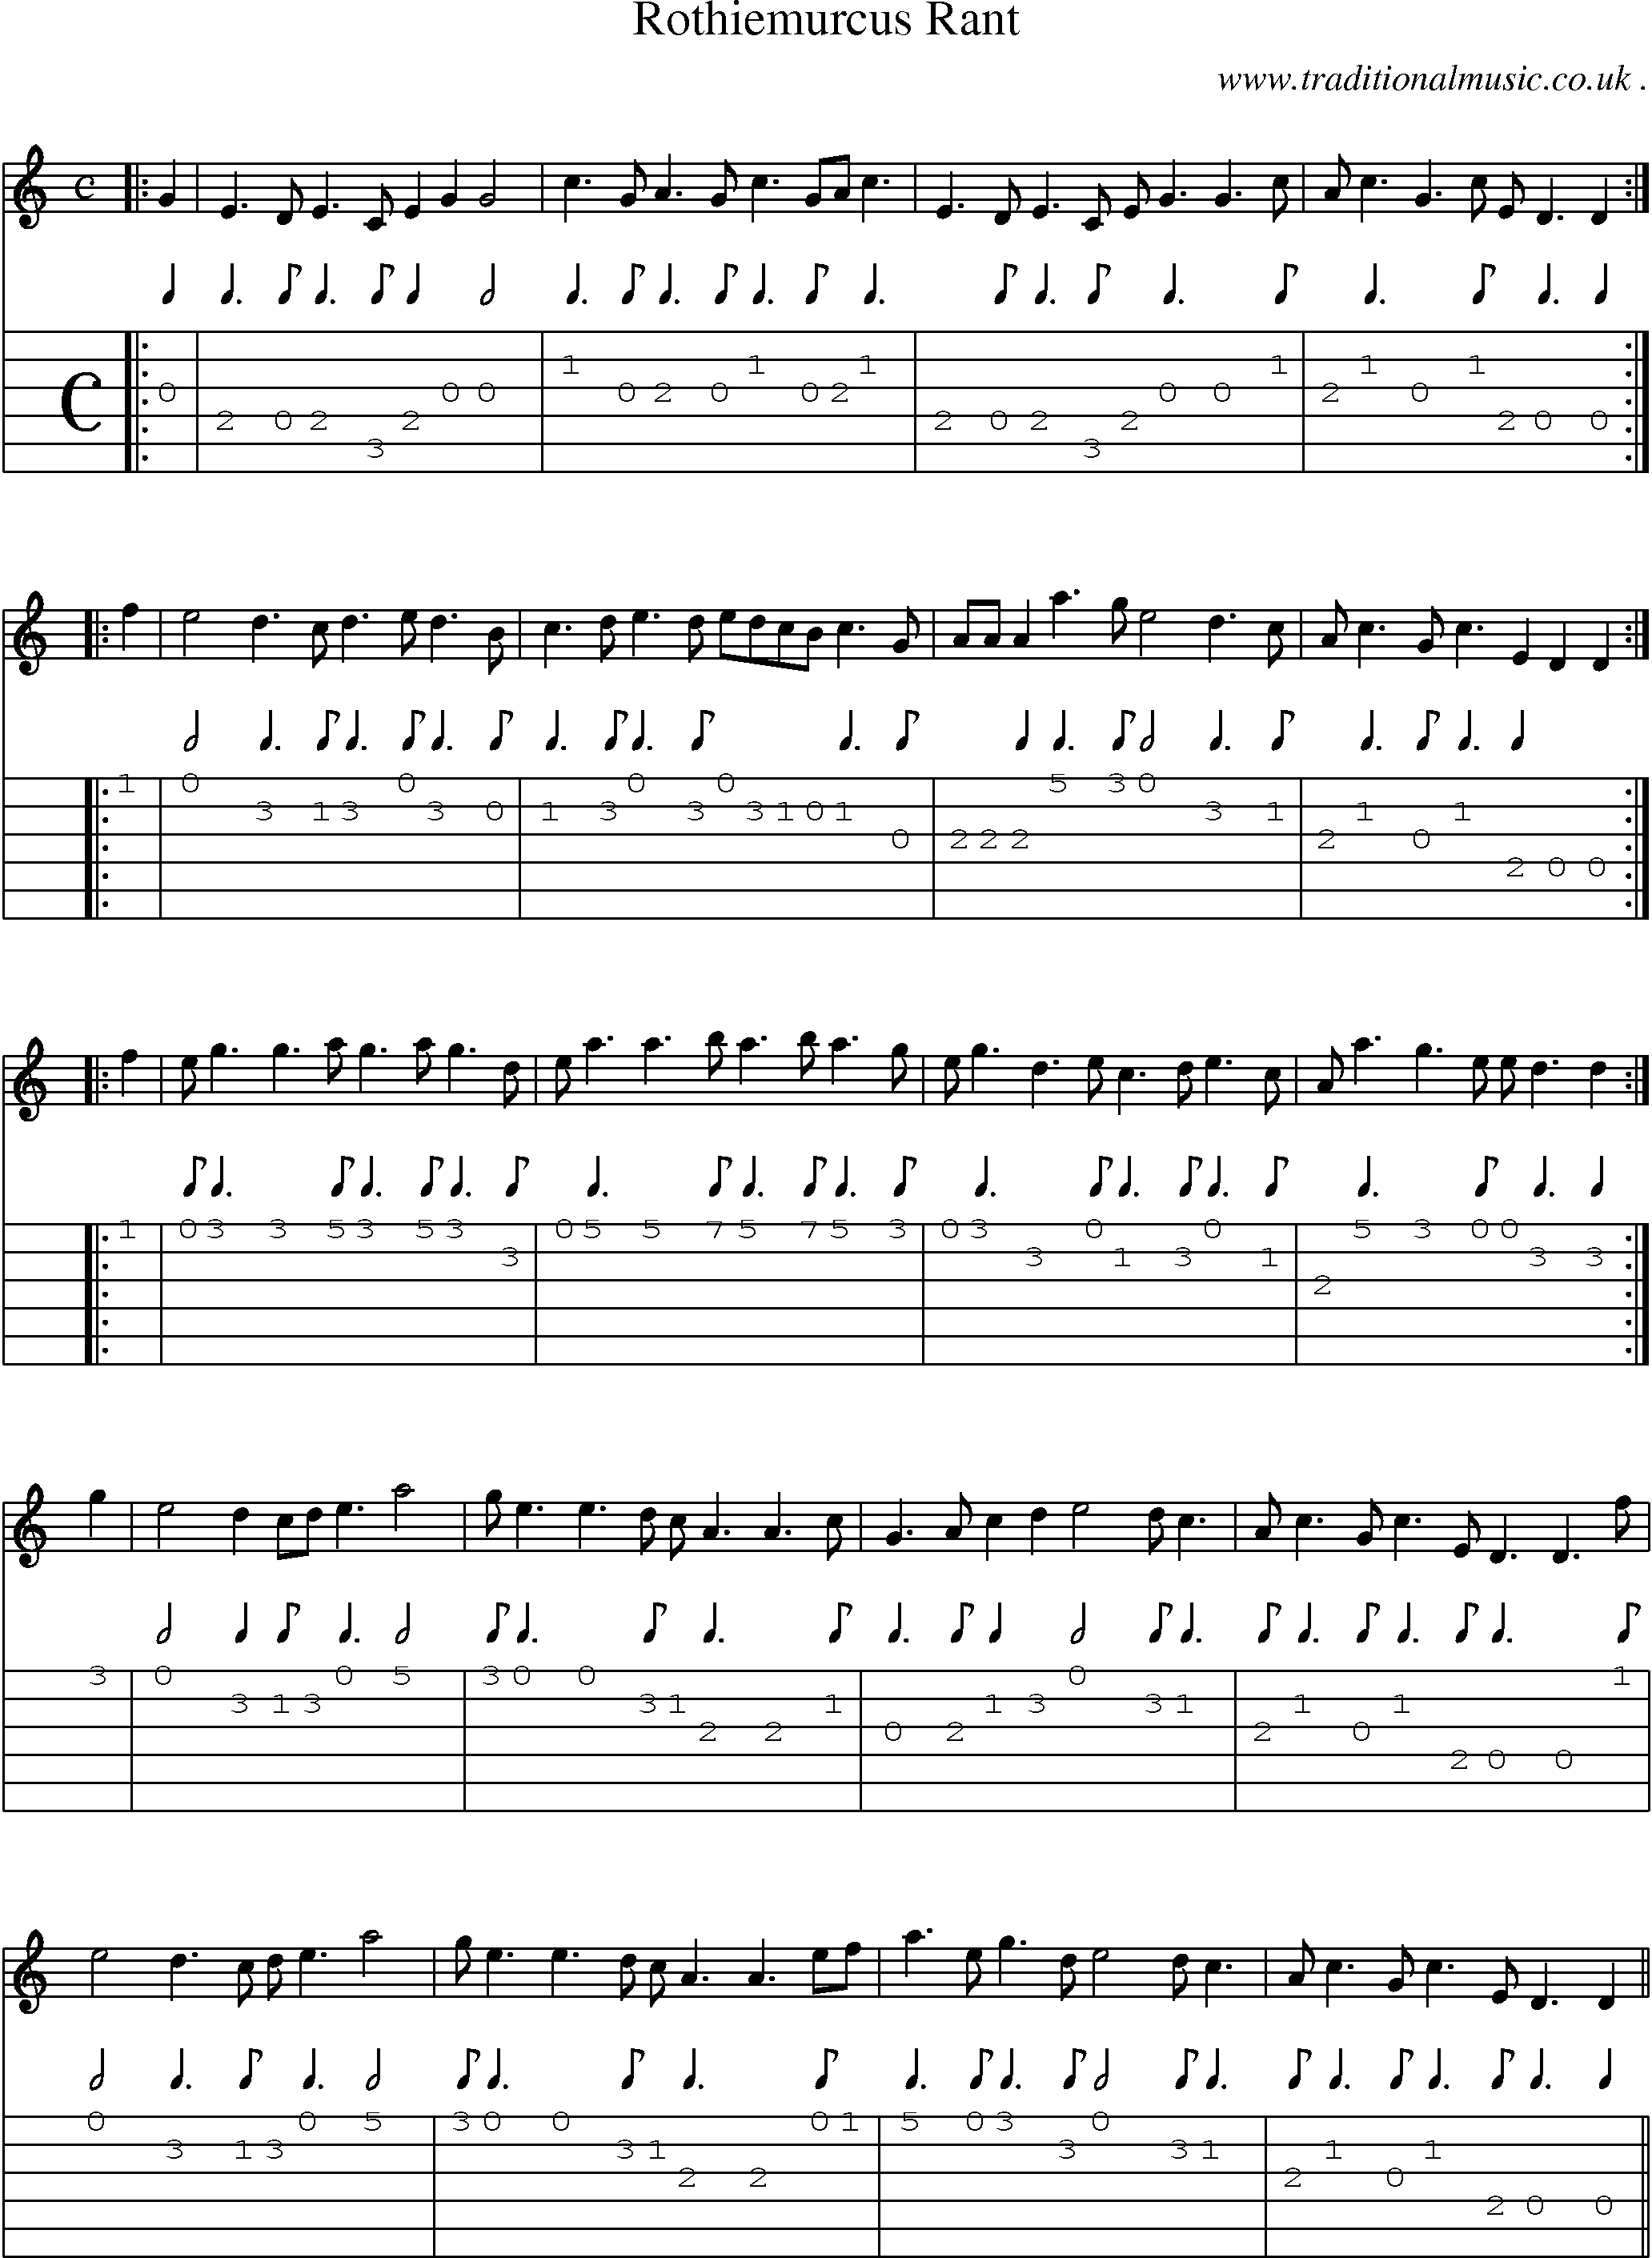 Sheet-music  score, Chords and Guitar Tabs for Rothiemurcus Rant